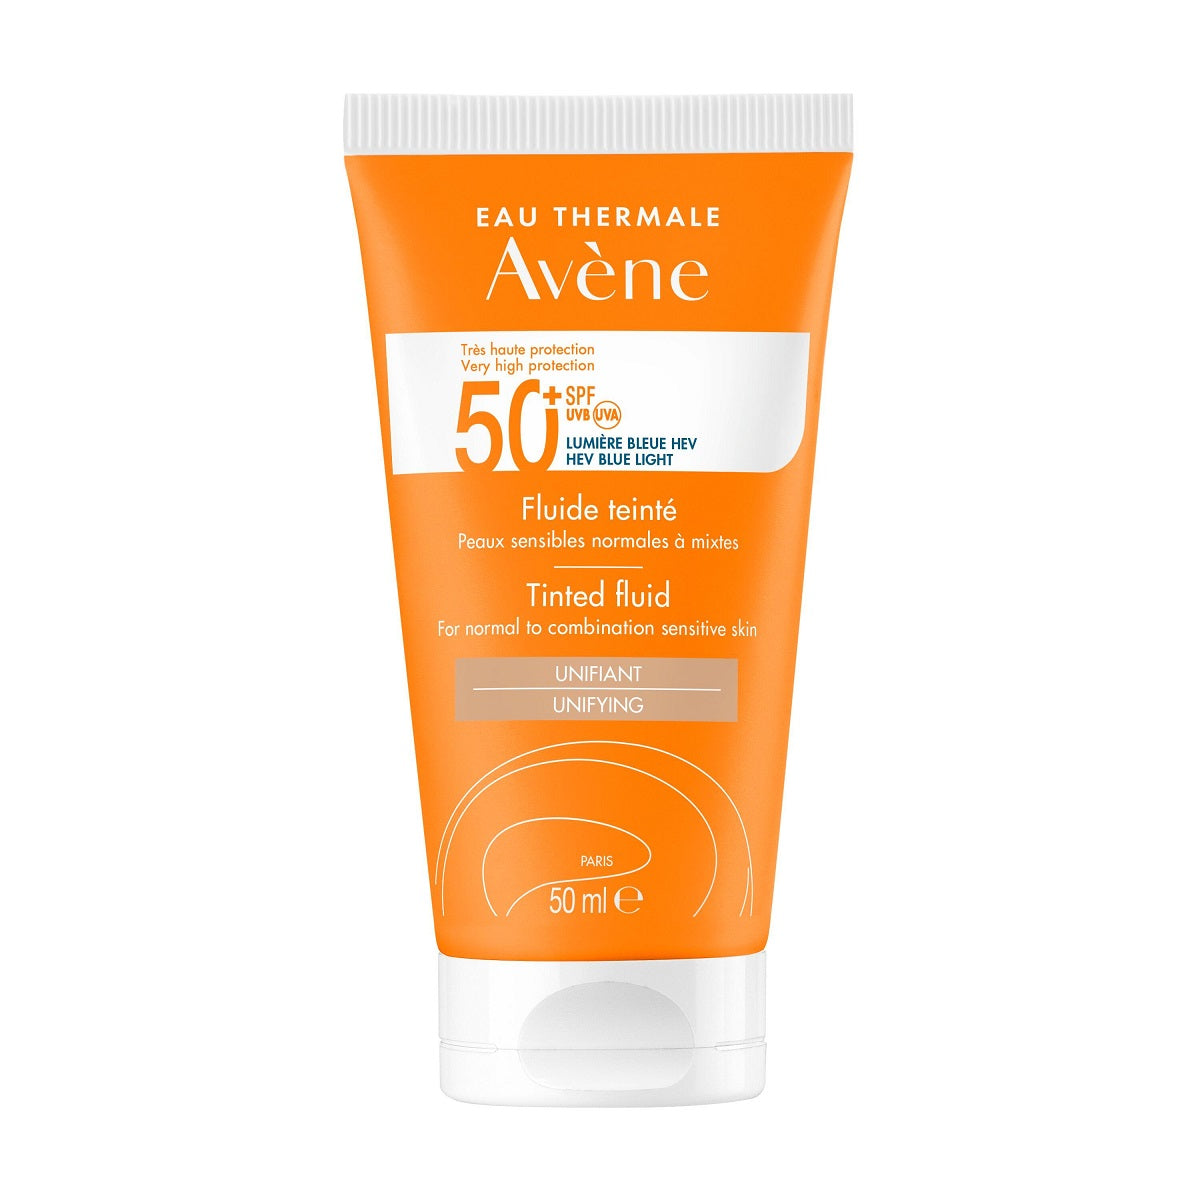 Avène Eau Thermale SPF 50+ Tinted Fluid